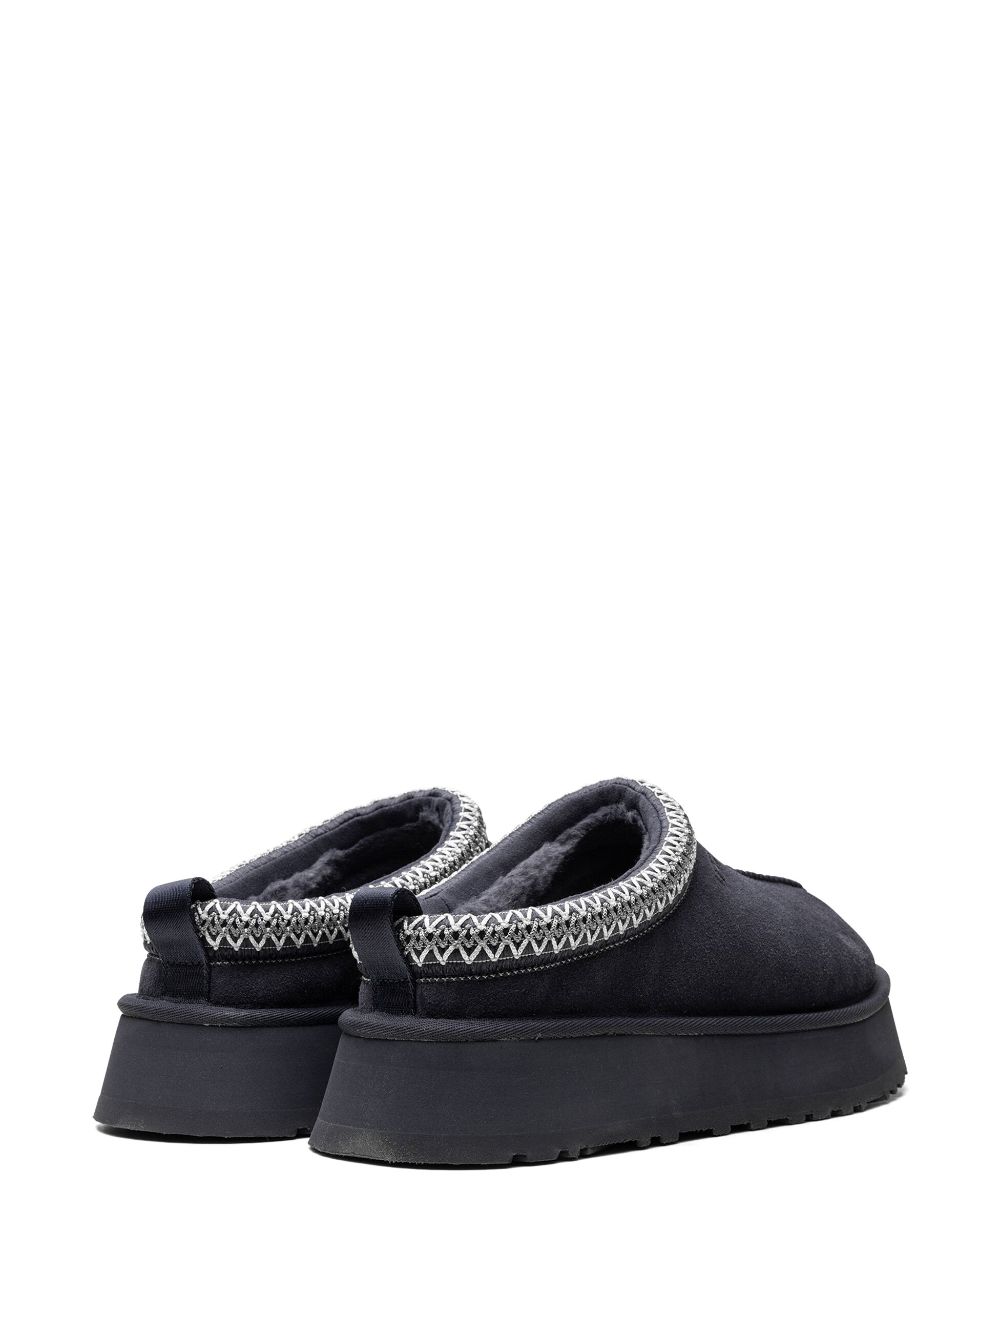 Shop Ugg Tazz "eve Blue" Sneakers